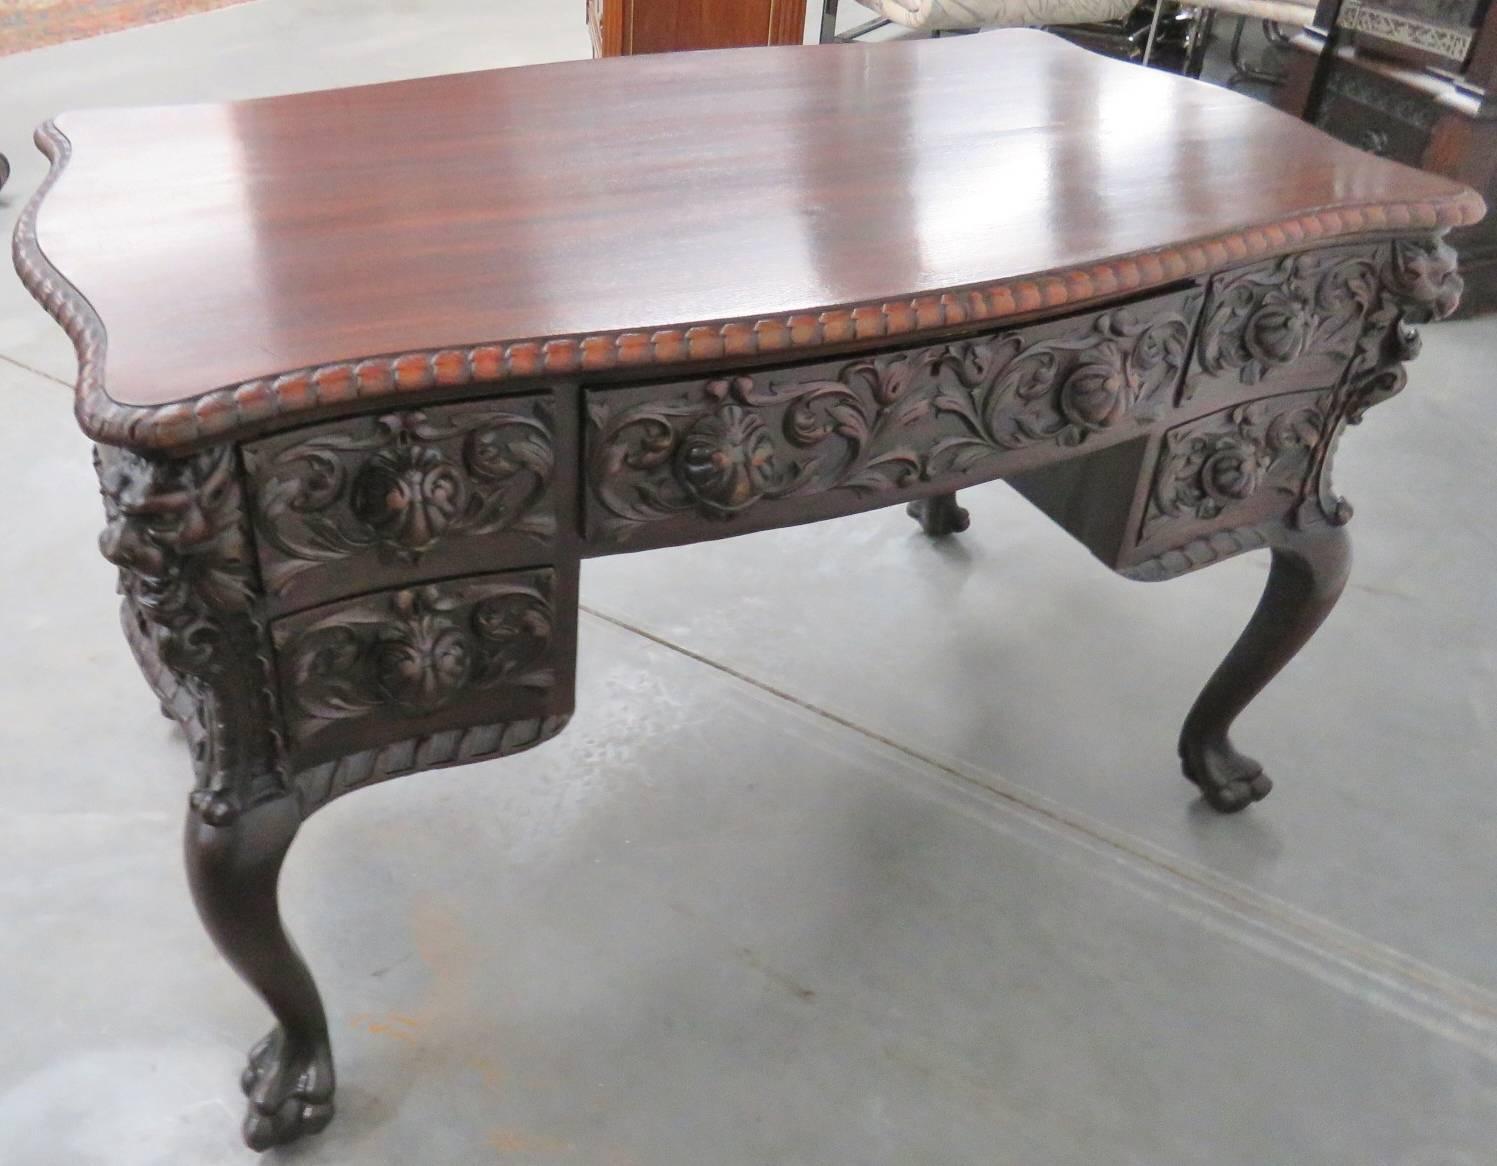 Carved mahogany with griffins and ball and claw feet.